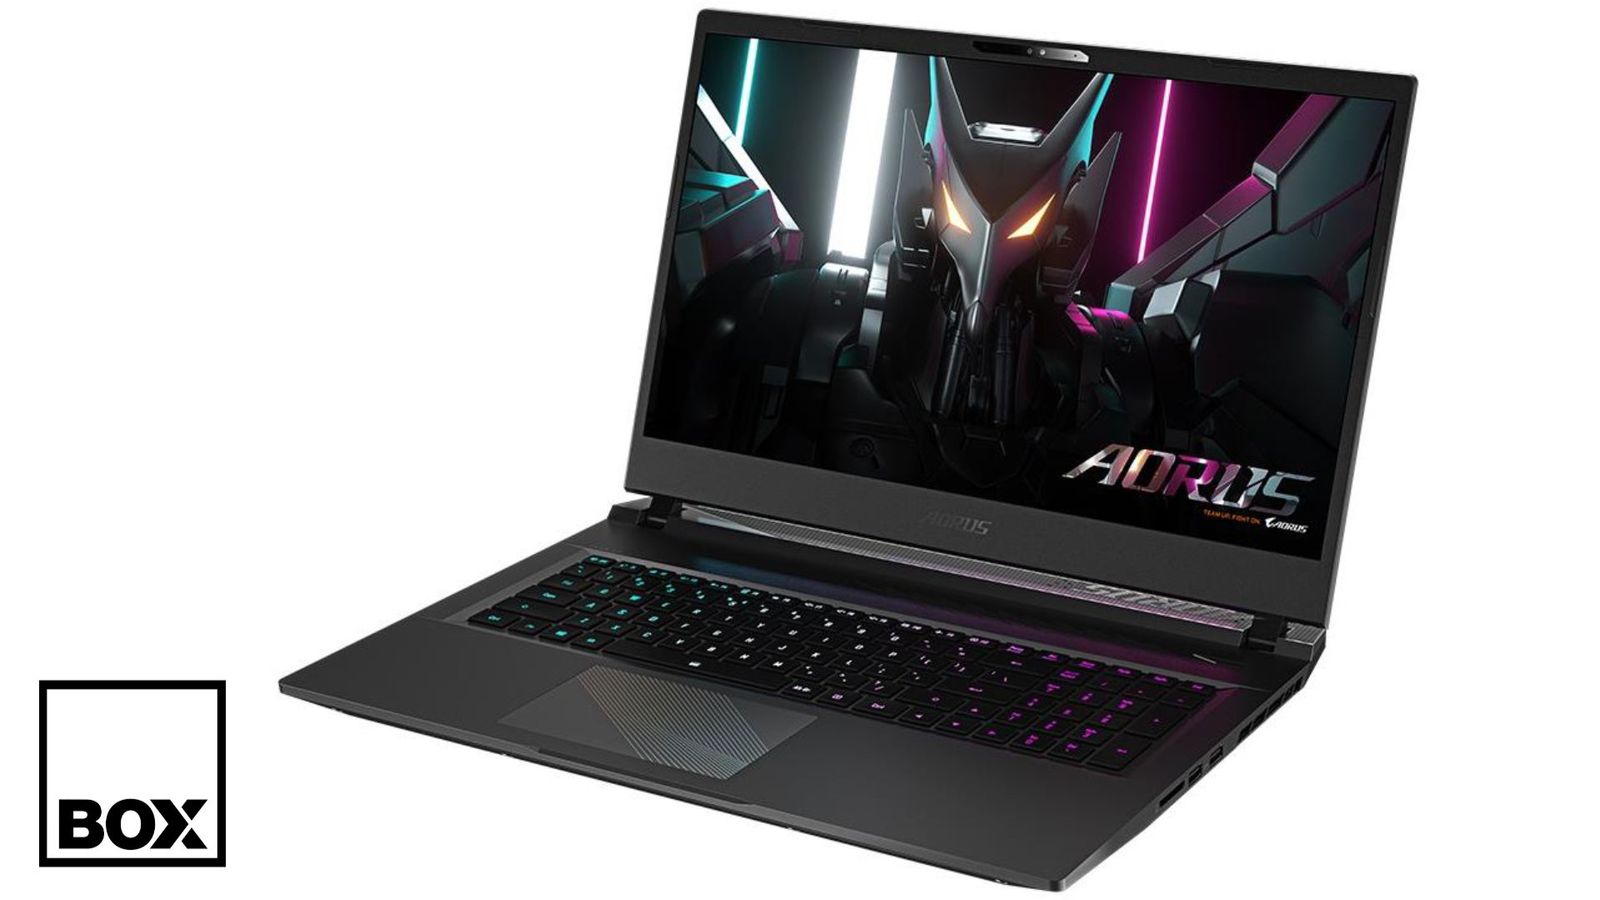 The Gigabyte Aorus 17 gaming laptop with the Aorus mechanical logo on screen and Box.co.uk logo in the bottom right